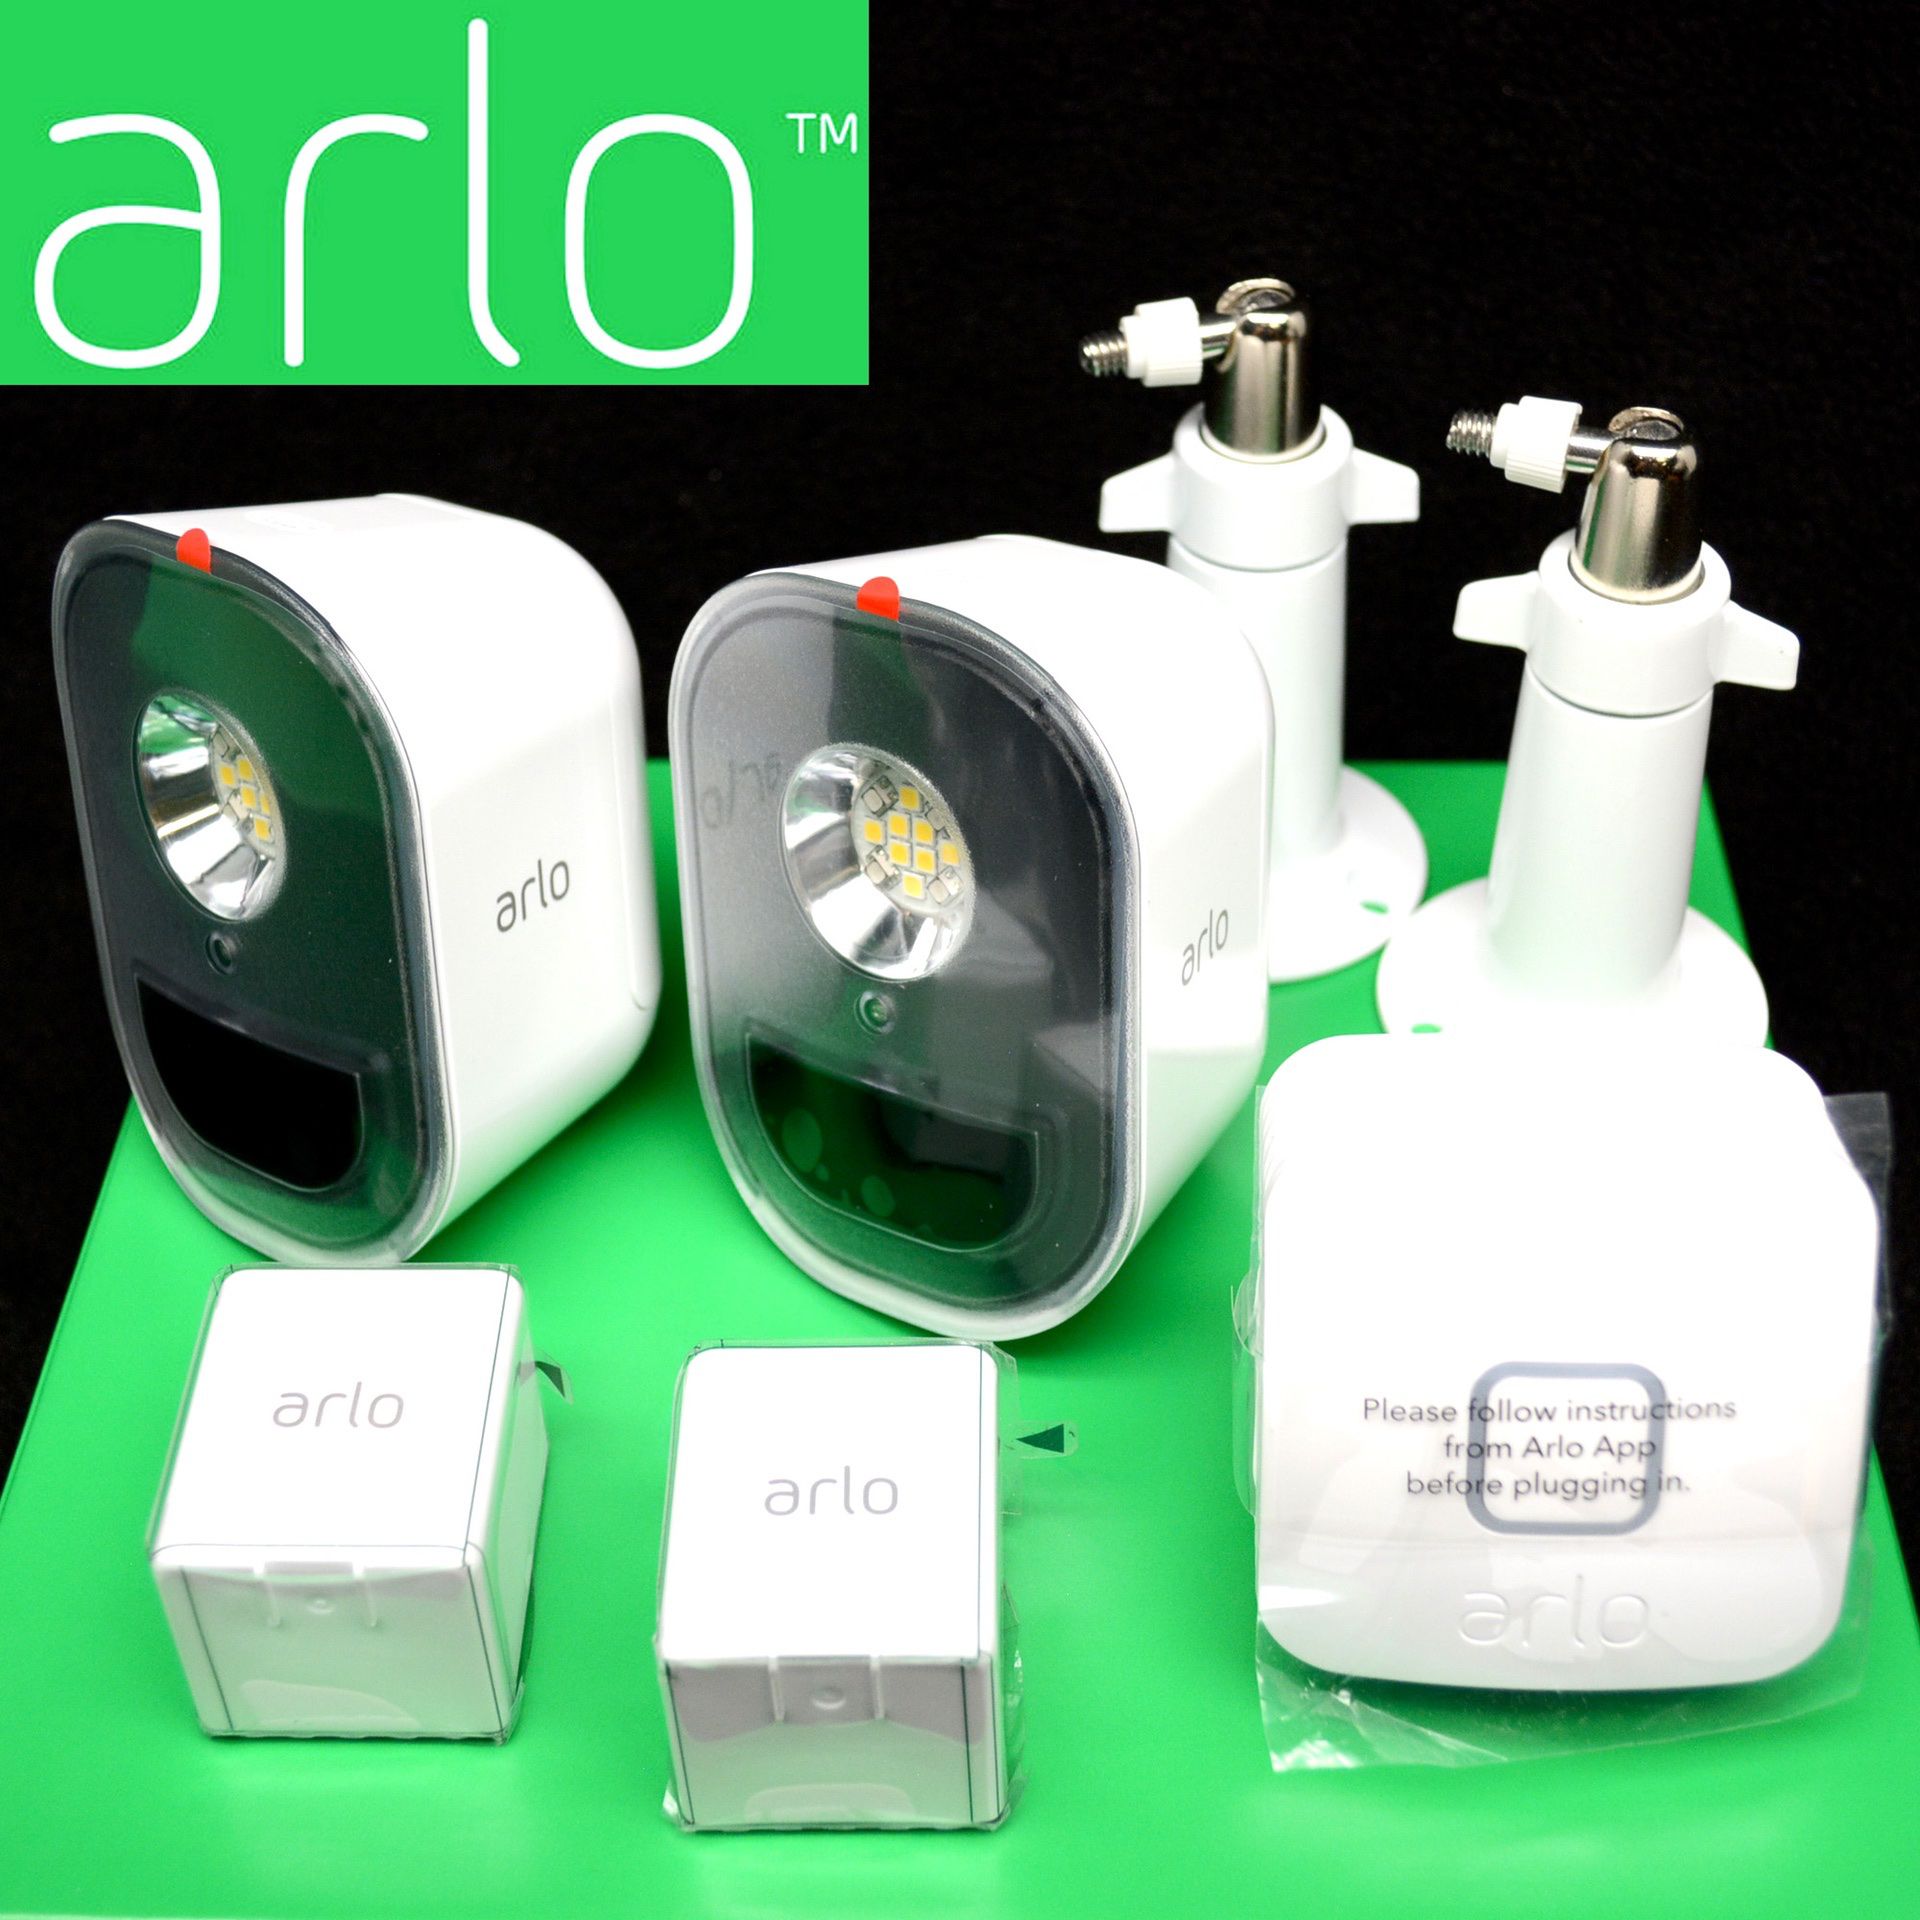 New - 2-Pack Arlo Smart Security Lights - Retails over $300